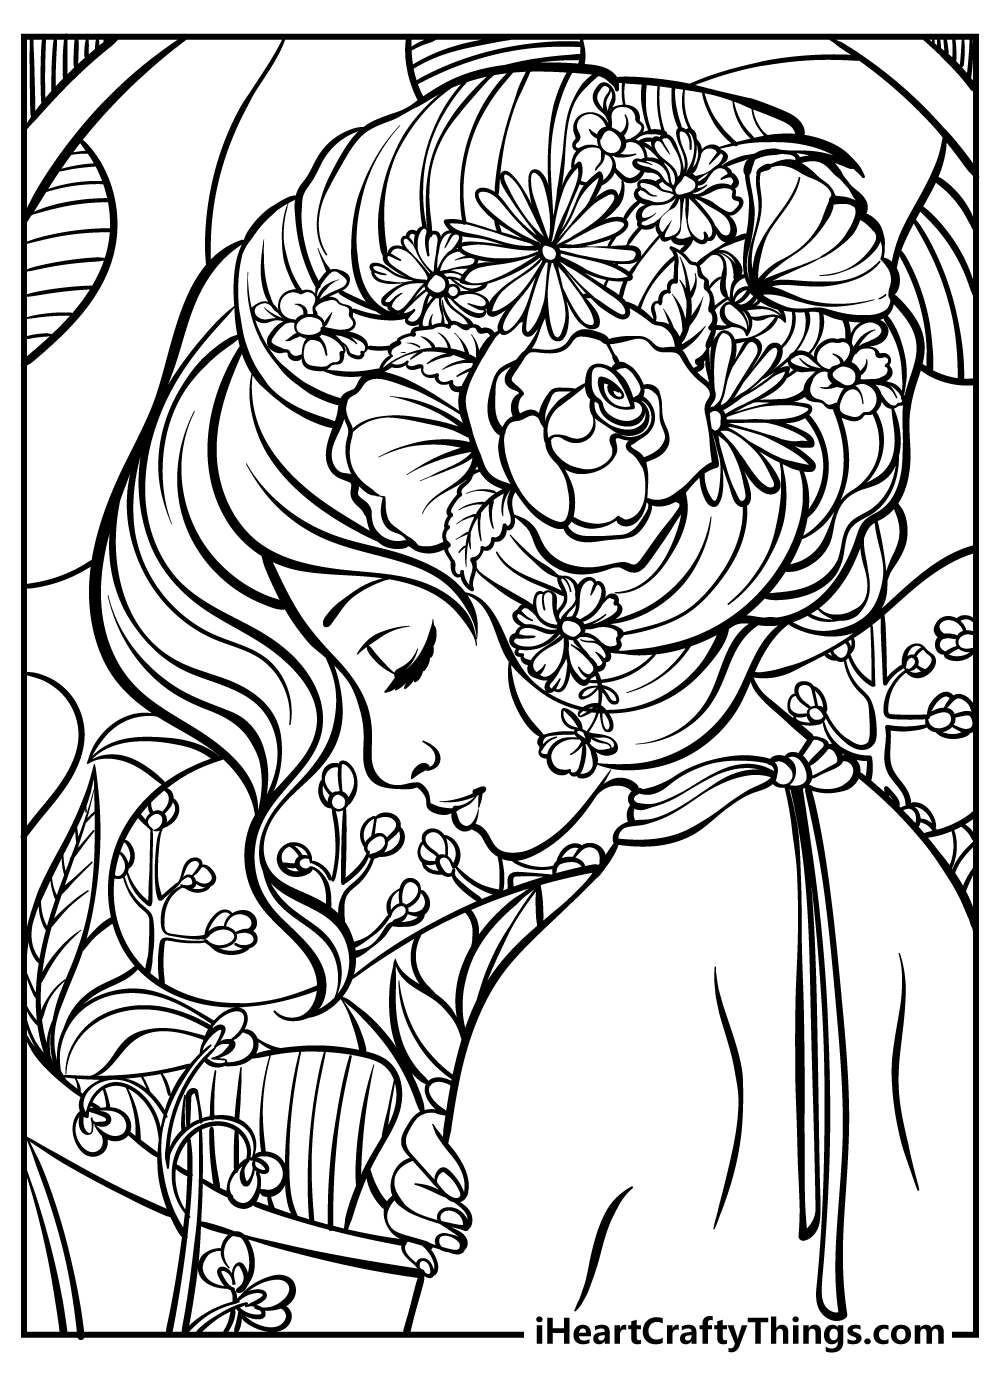 Adult Coloring Pages free printable